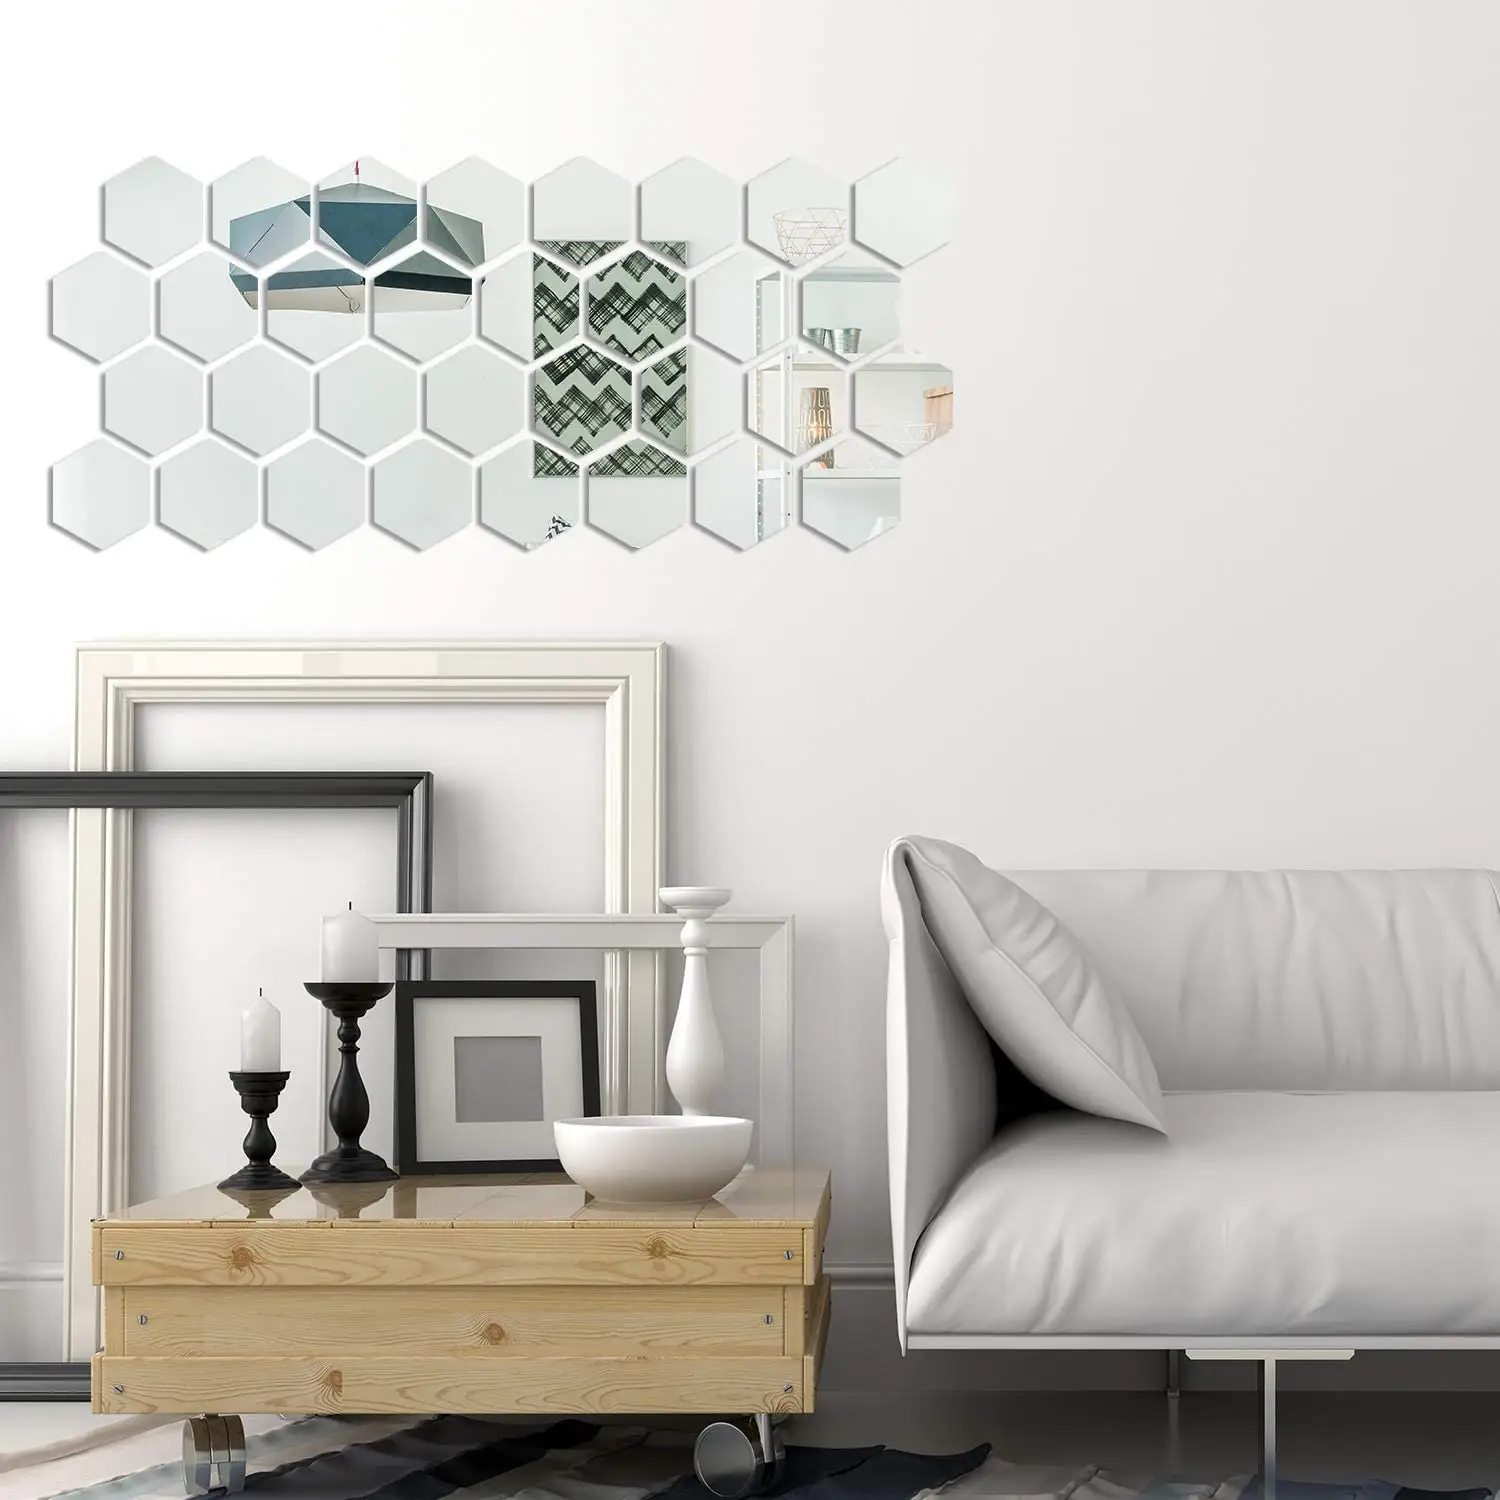 Custom DIY Acrylic Mirror Stickers Removable Wall Stickers Decals For Home Art Room Bedroom Background Decor